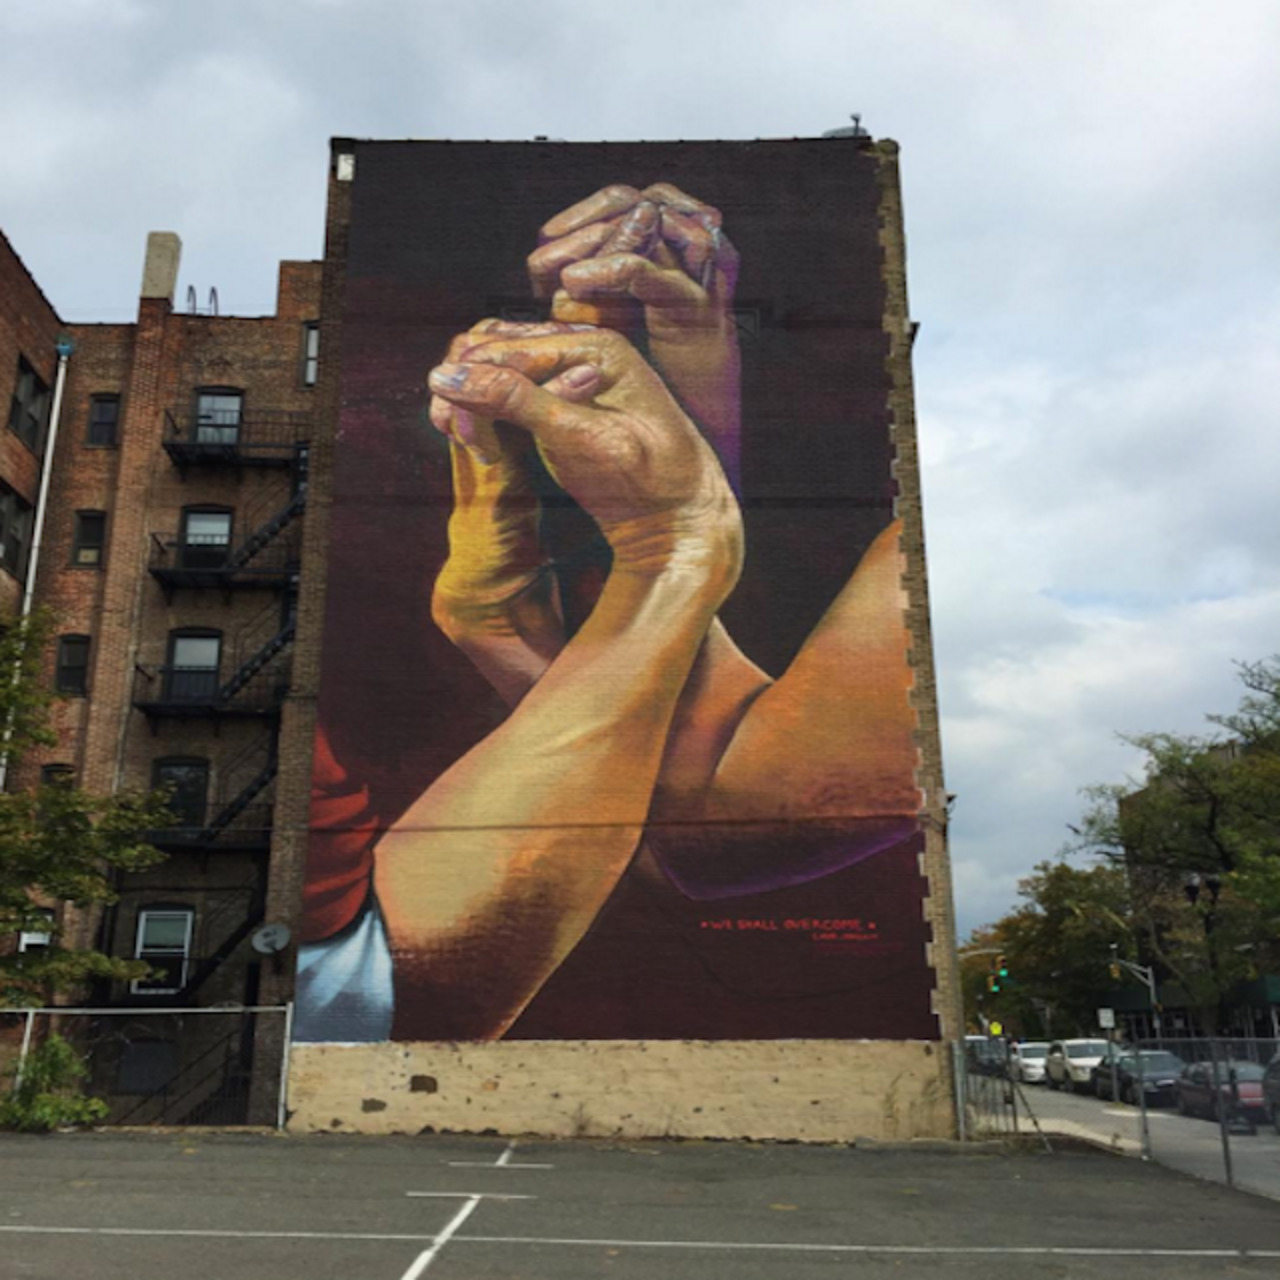 "We shall overcome" @case_maclaim 's #mural in #jerseycity on the #25yearsofgermanunity  #graffiti #streetart http://t.co/IfTAVUCmHh